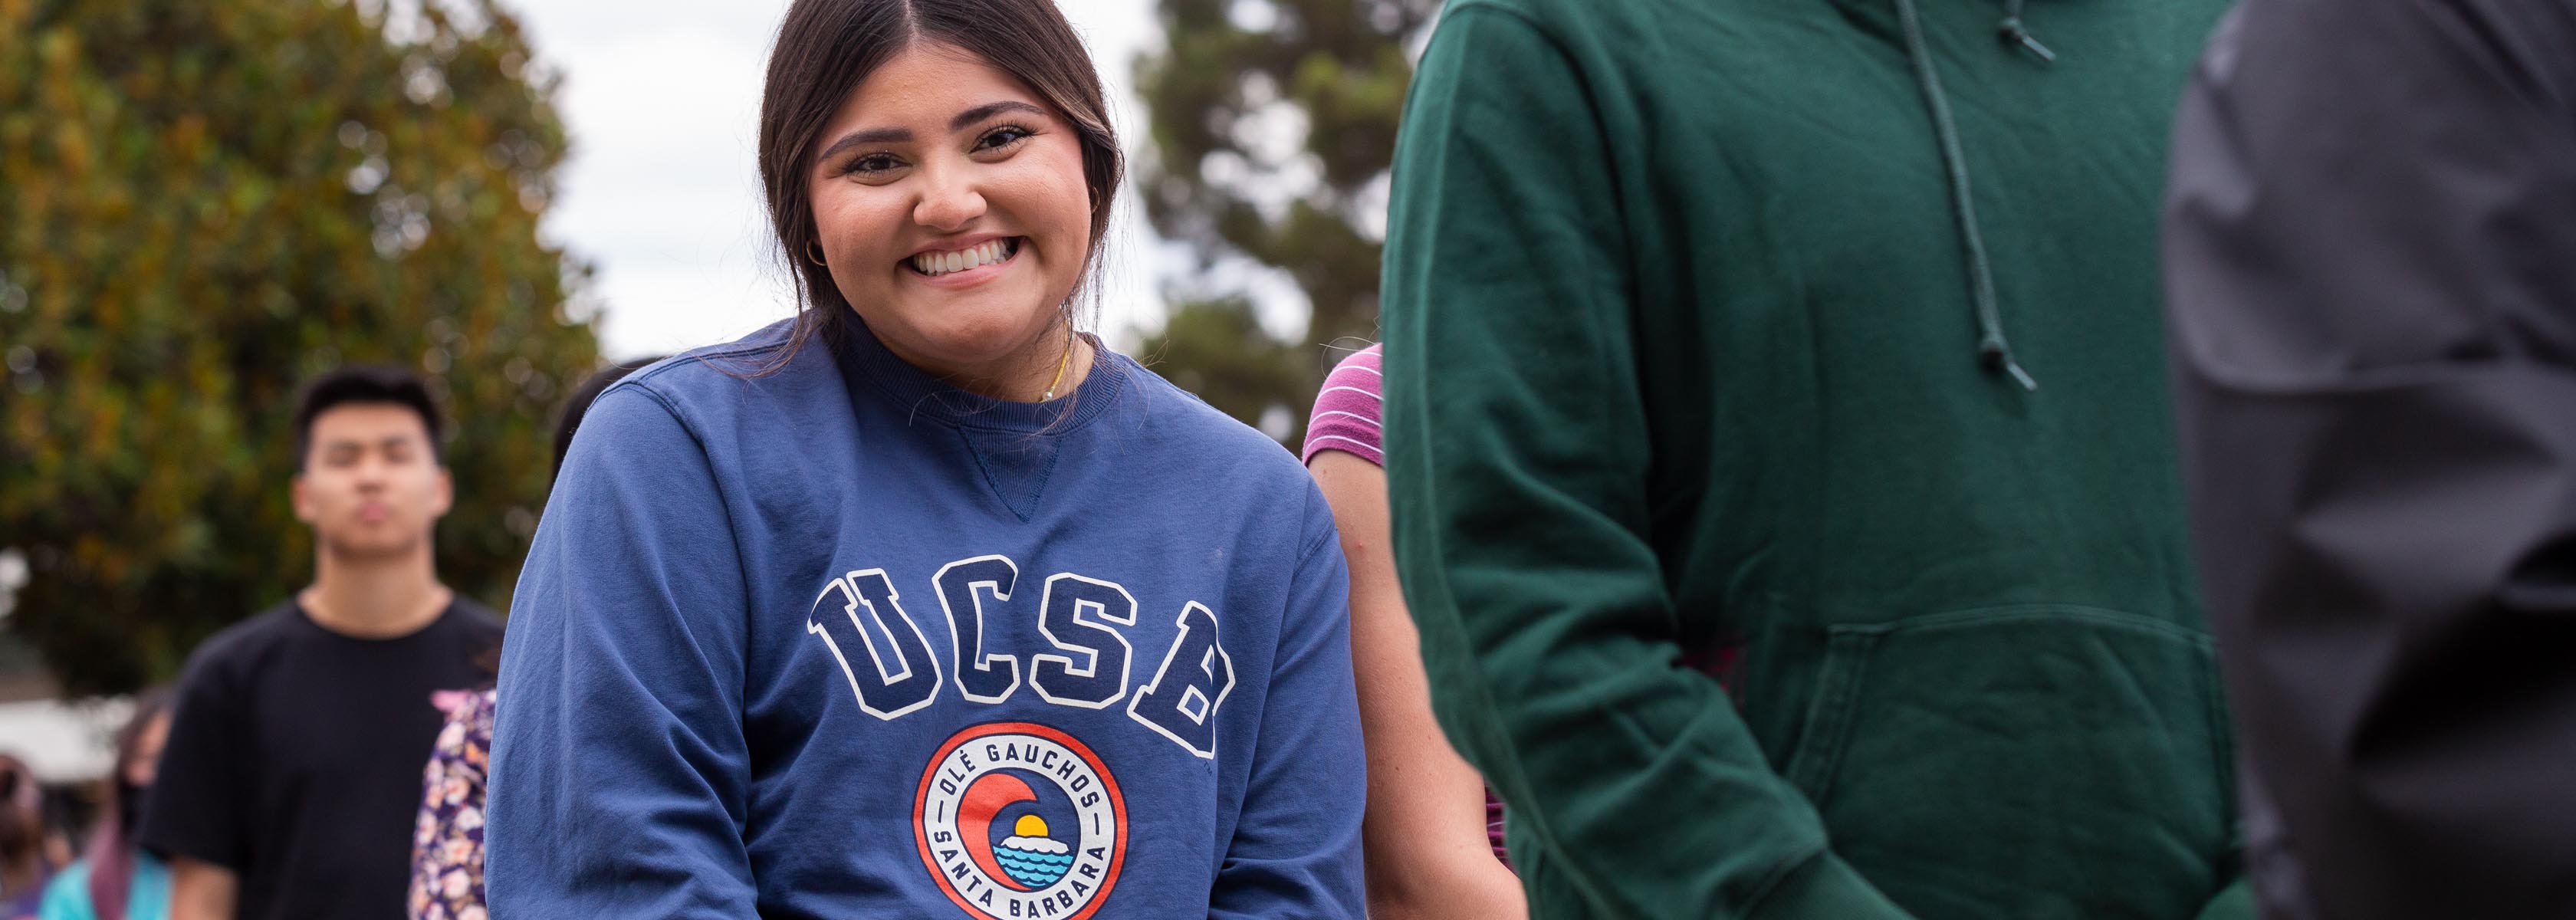 A student with UCSB sweat shirt